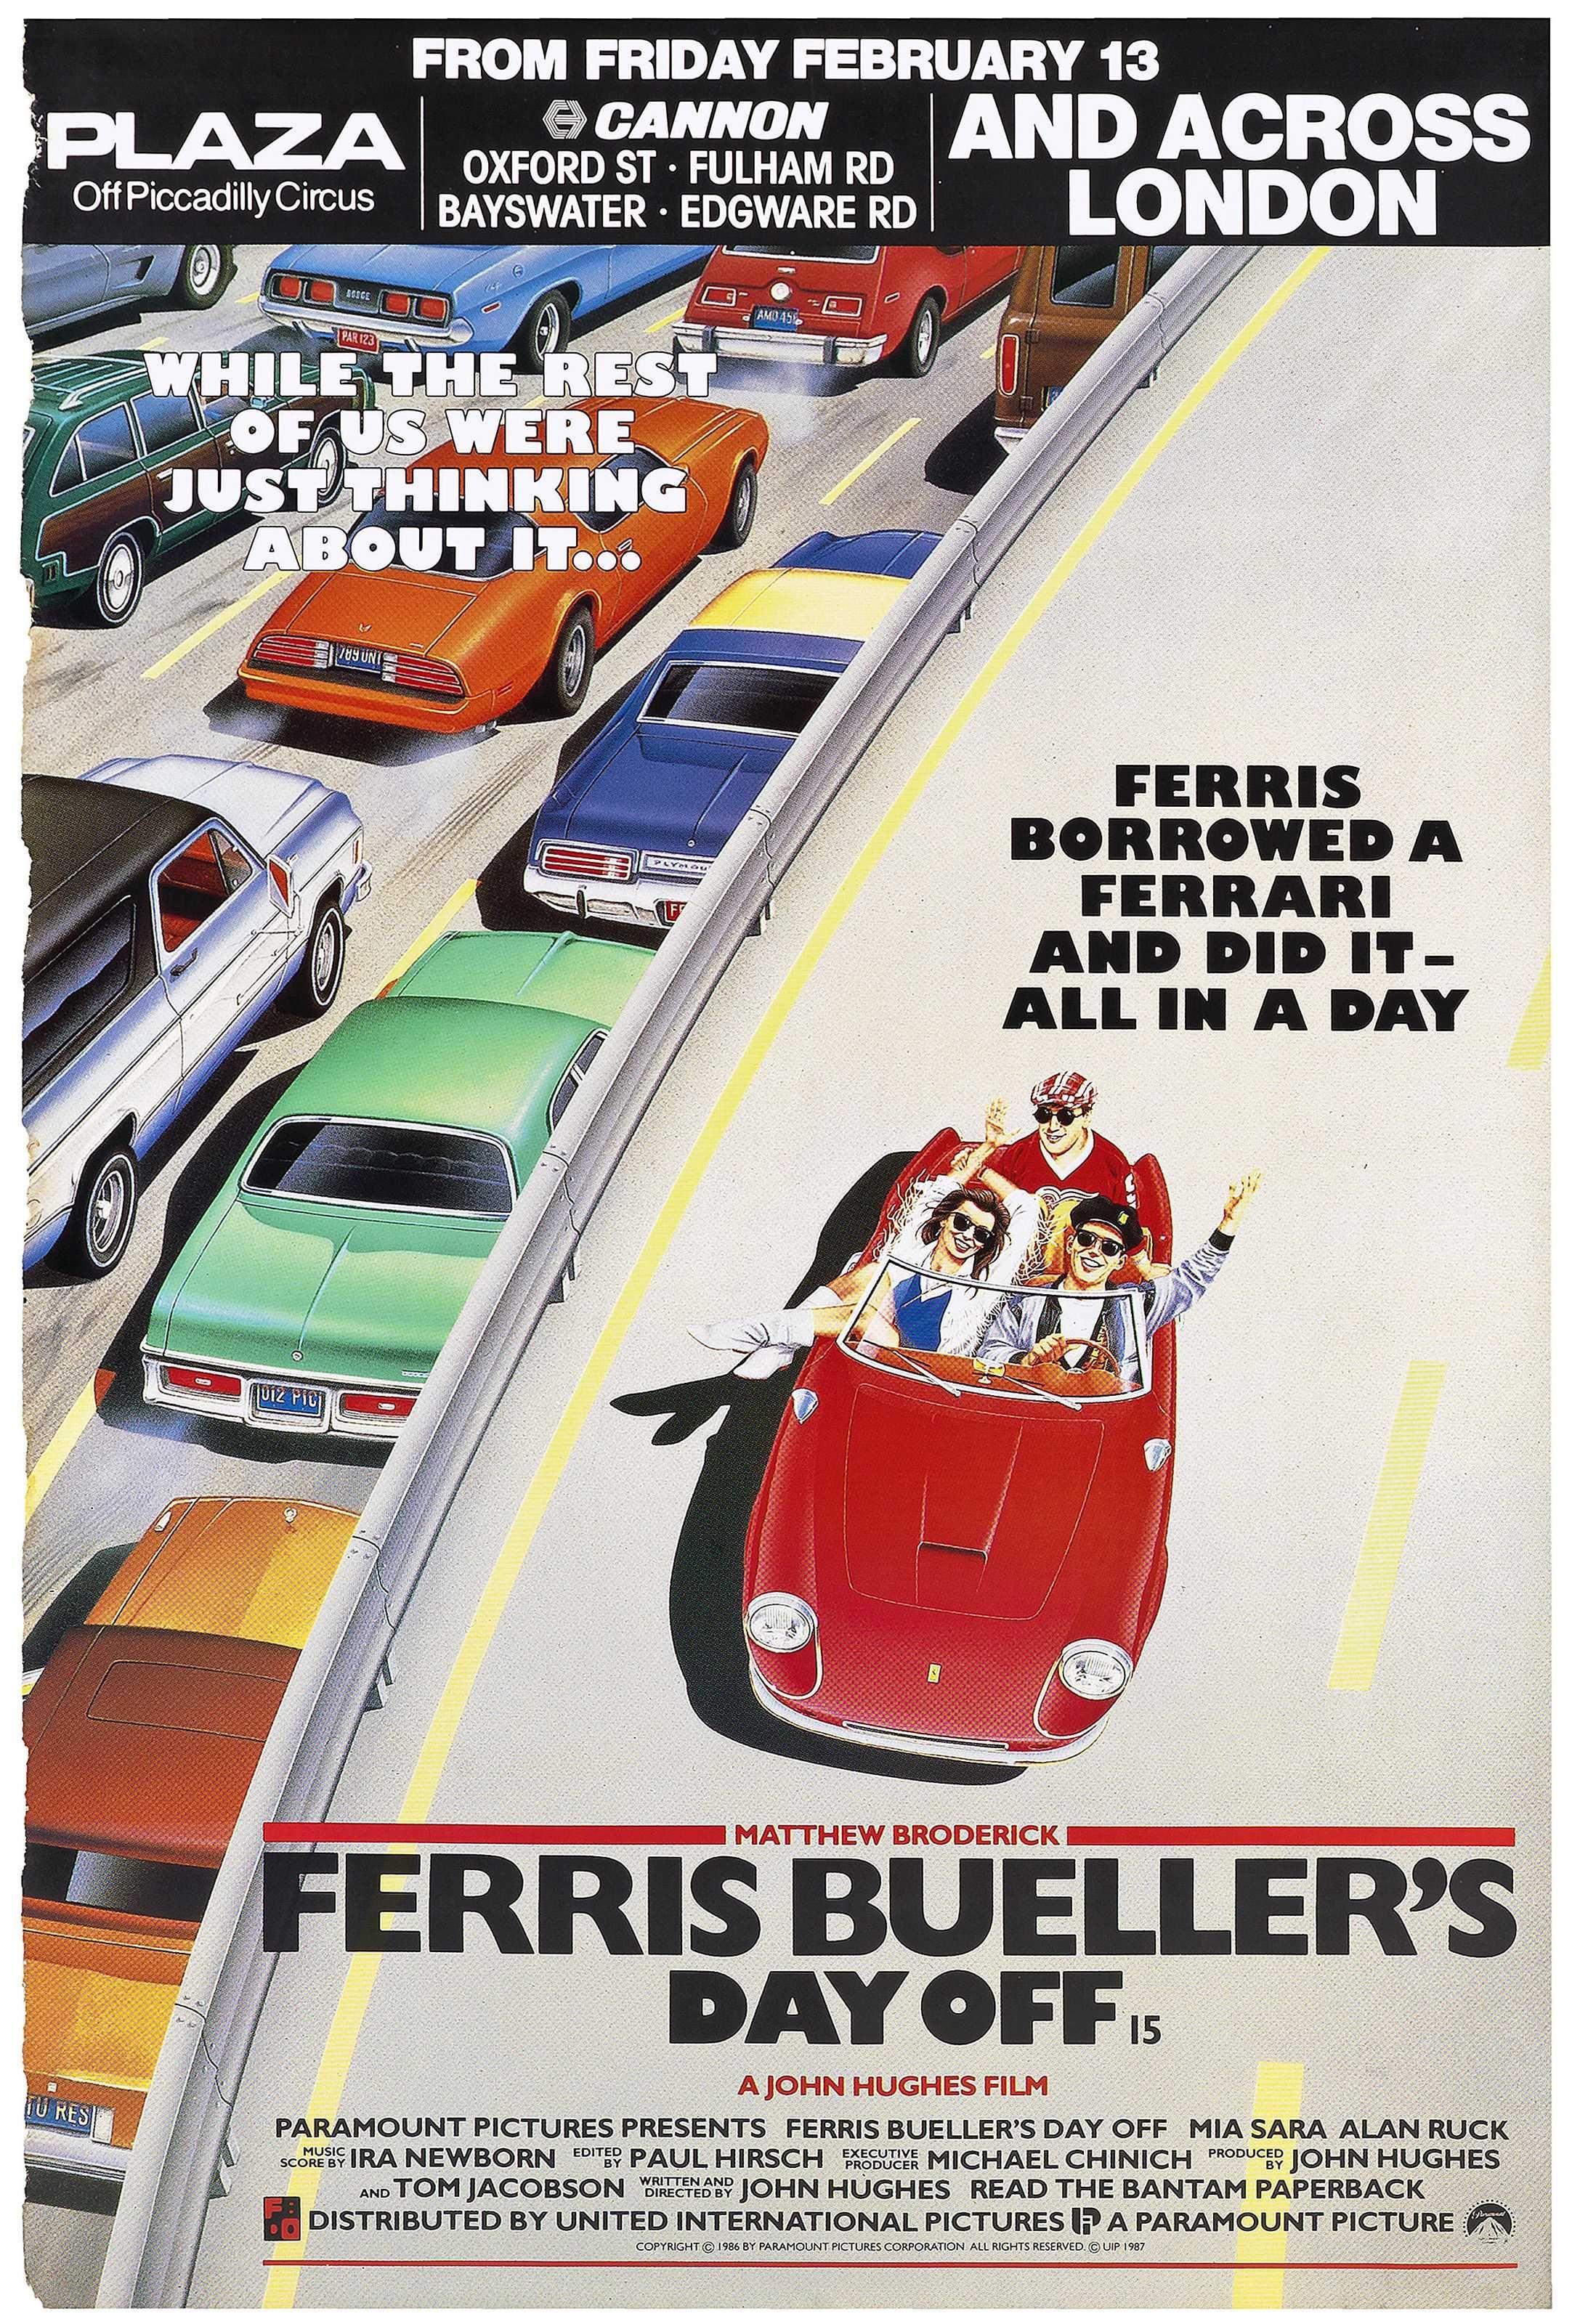 edgarwright bill for the day: Ferris Bueller's Day Off (1986) & Election (1999). A top grade high school double with the added pleasure of seeing Matthew Broderick metamorphosize from